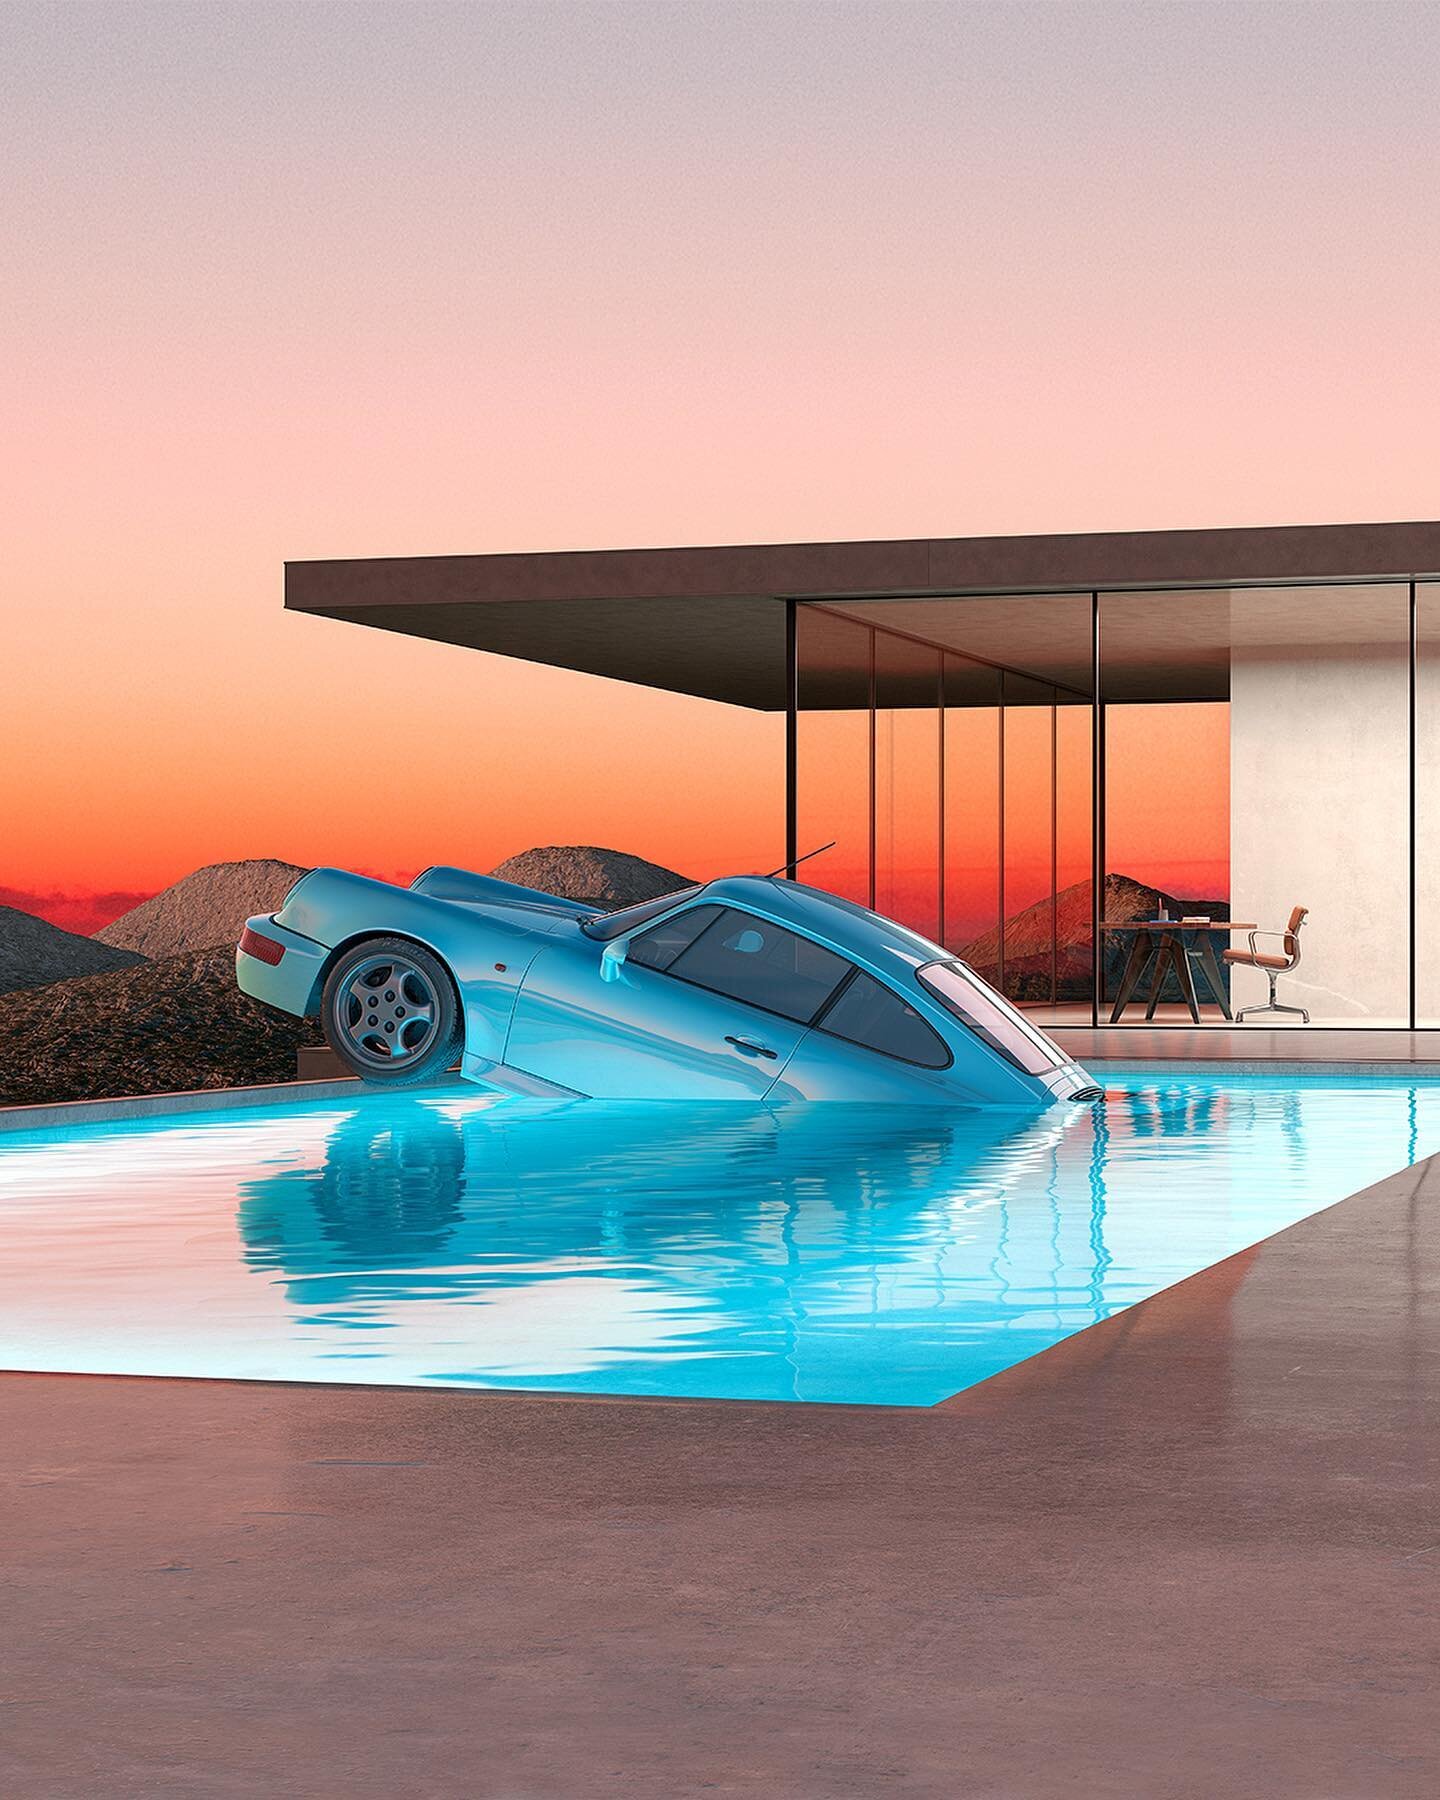 Blue 964 in a pool with the lights on and off. I couldn&rsquo;t decide which I preferred so I am offering both. #sunset #porsche #design #artwork #swimmingpool